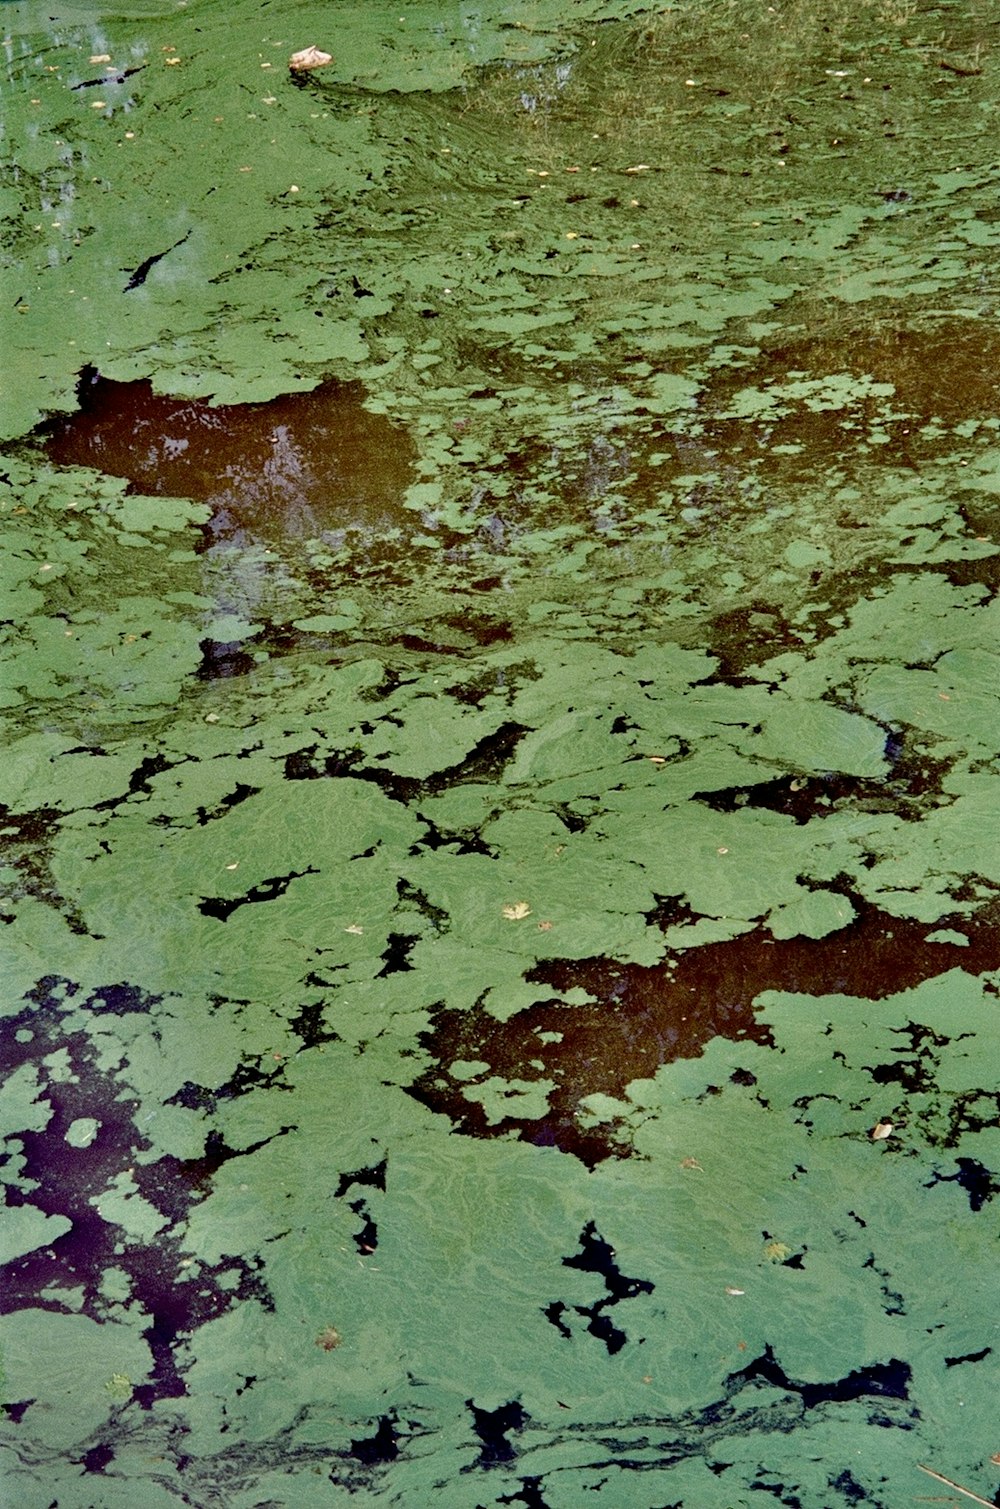 a large body of water filled with lots of green algae